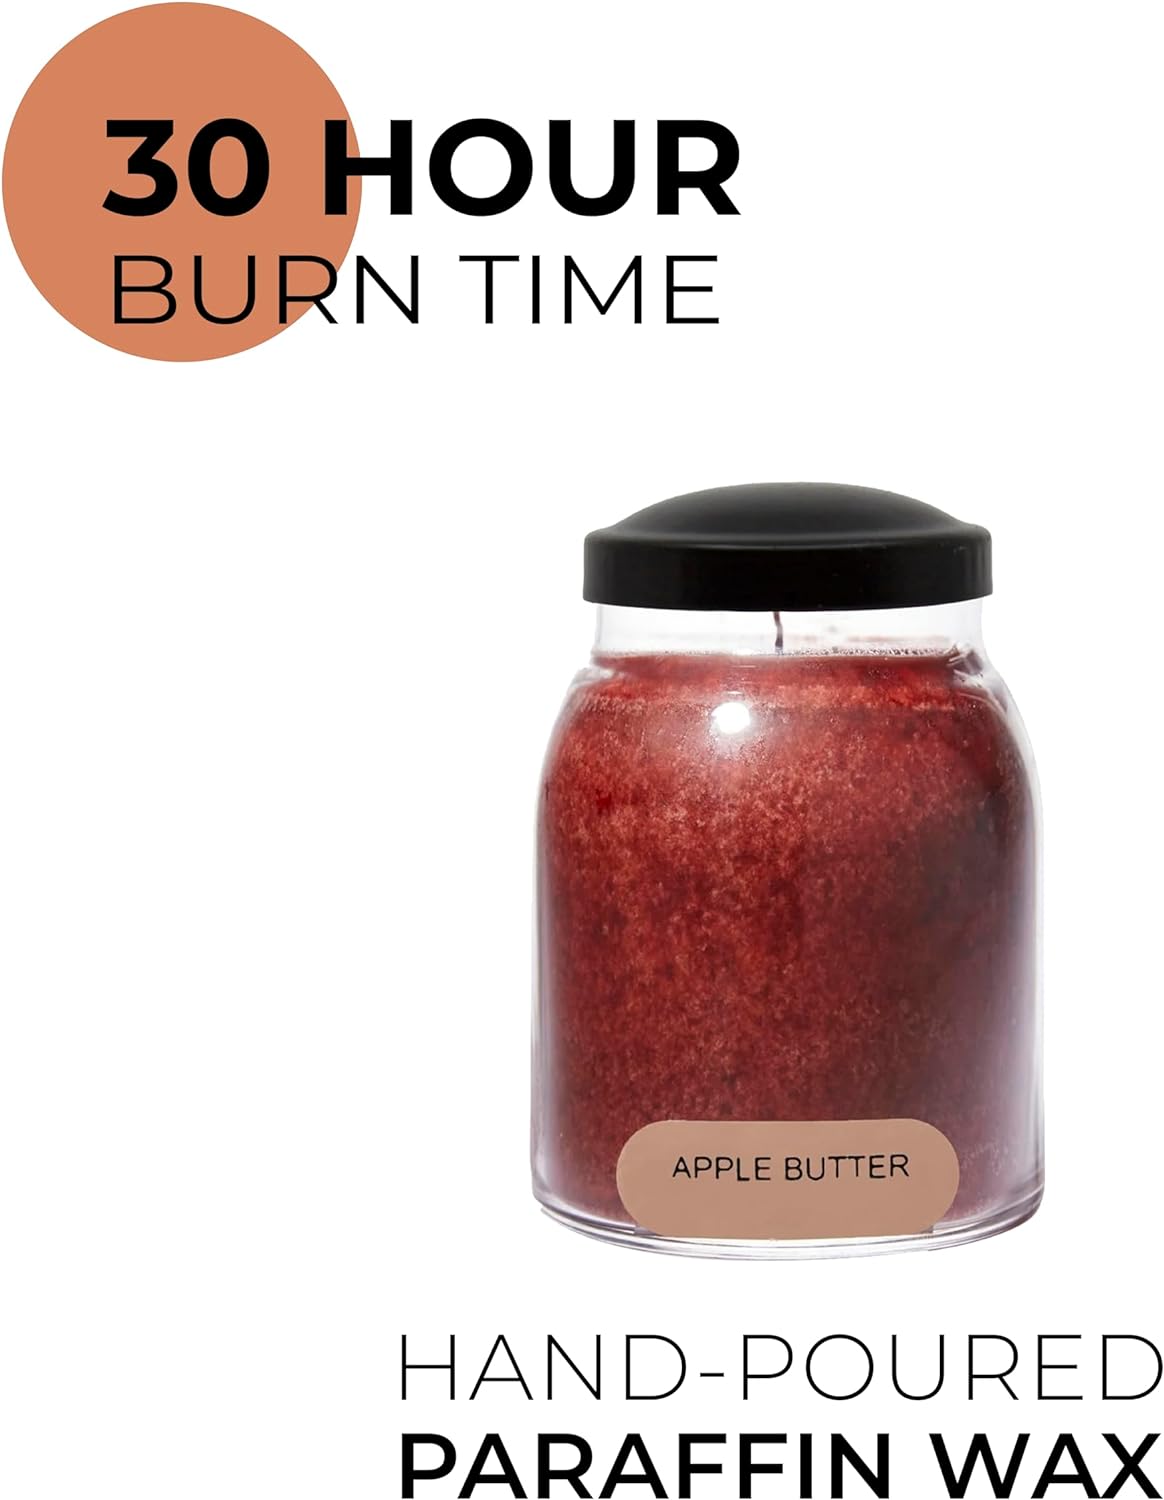 A Cheerful Giver - Cranberry Orange - 34oz Papa Scented Candle Jar with Lid - Keepers of the Light - 155 Hours of Burn Time, Gift for Women, Red